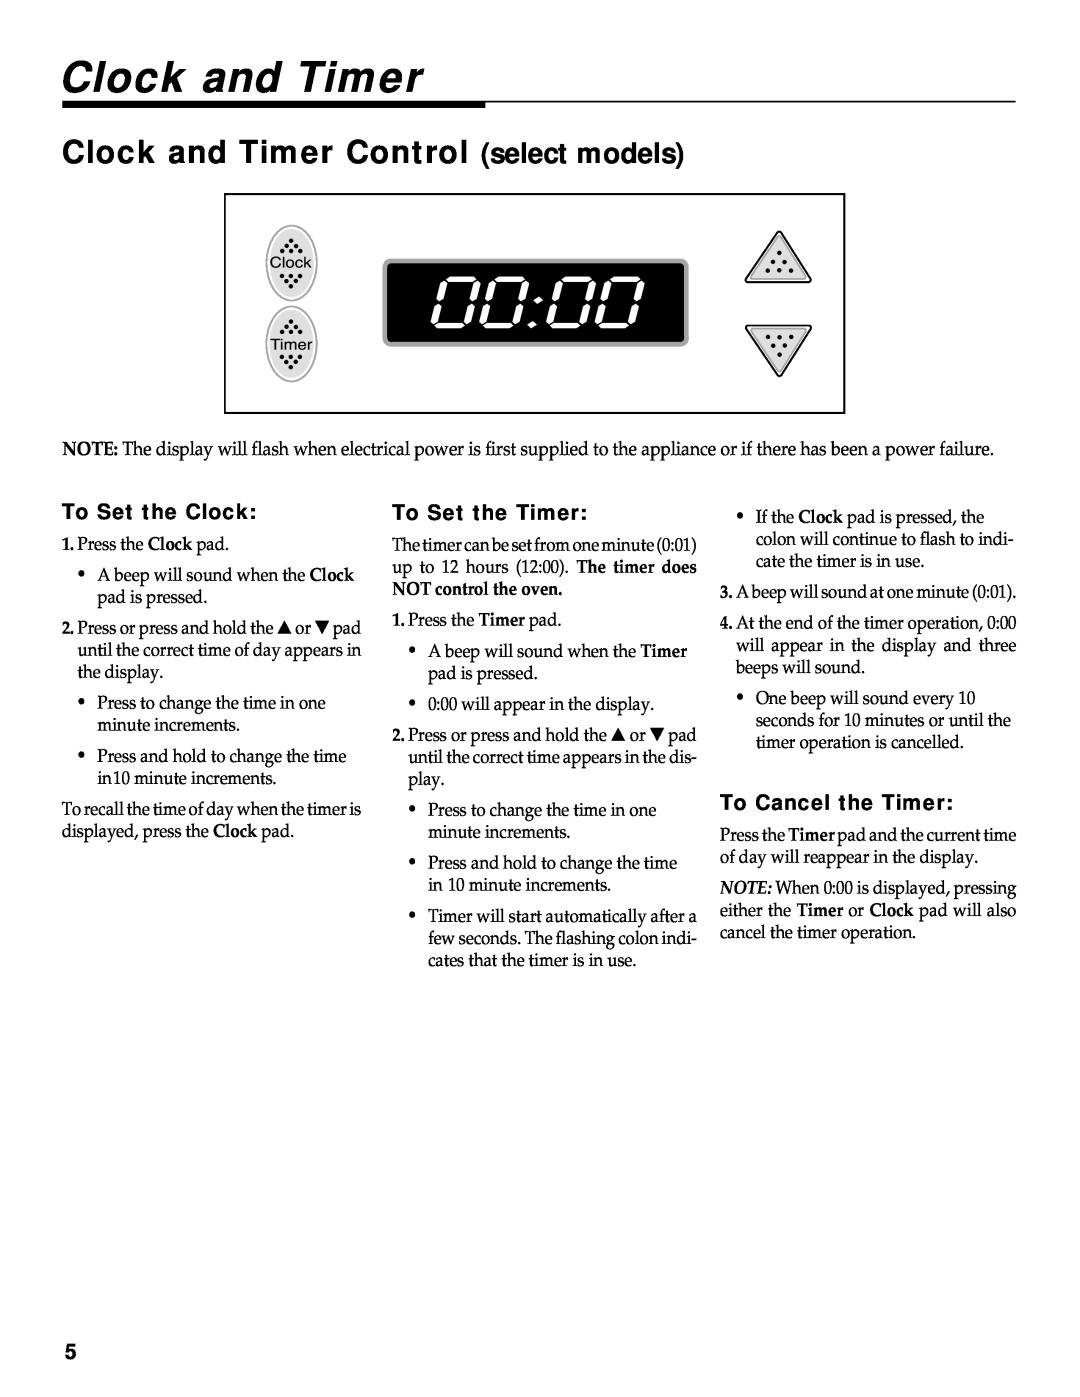 Maytag WT-TOD warranty Clock and Timer Control select models, To Set the Clock, To Set the Timer, To Cancel the Timer 